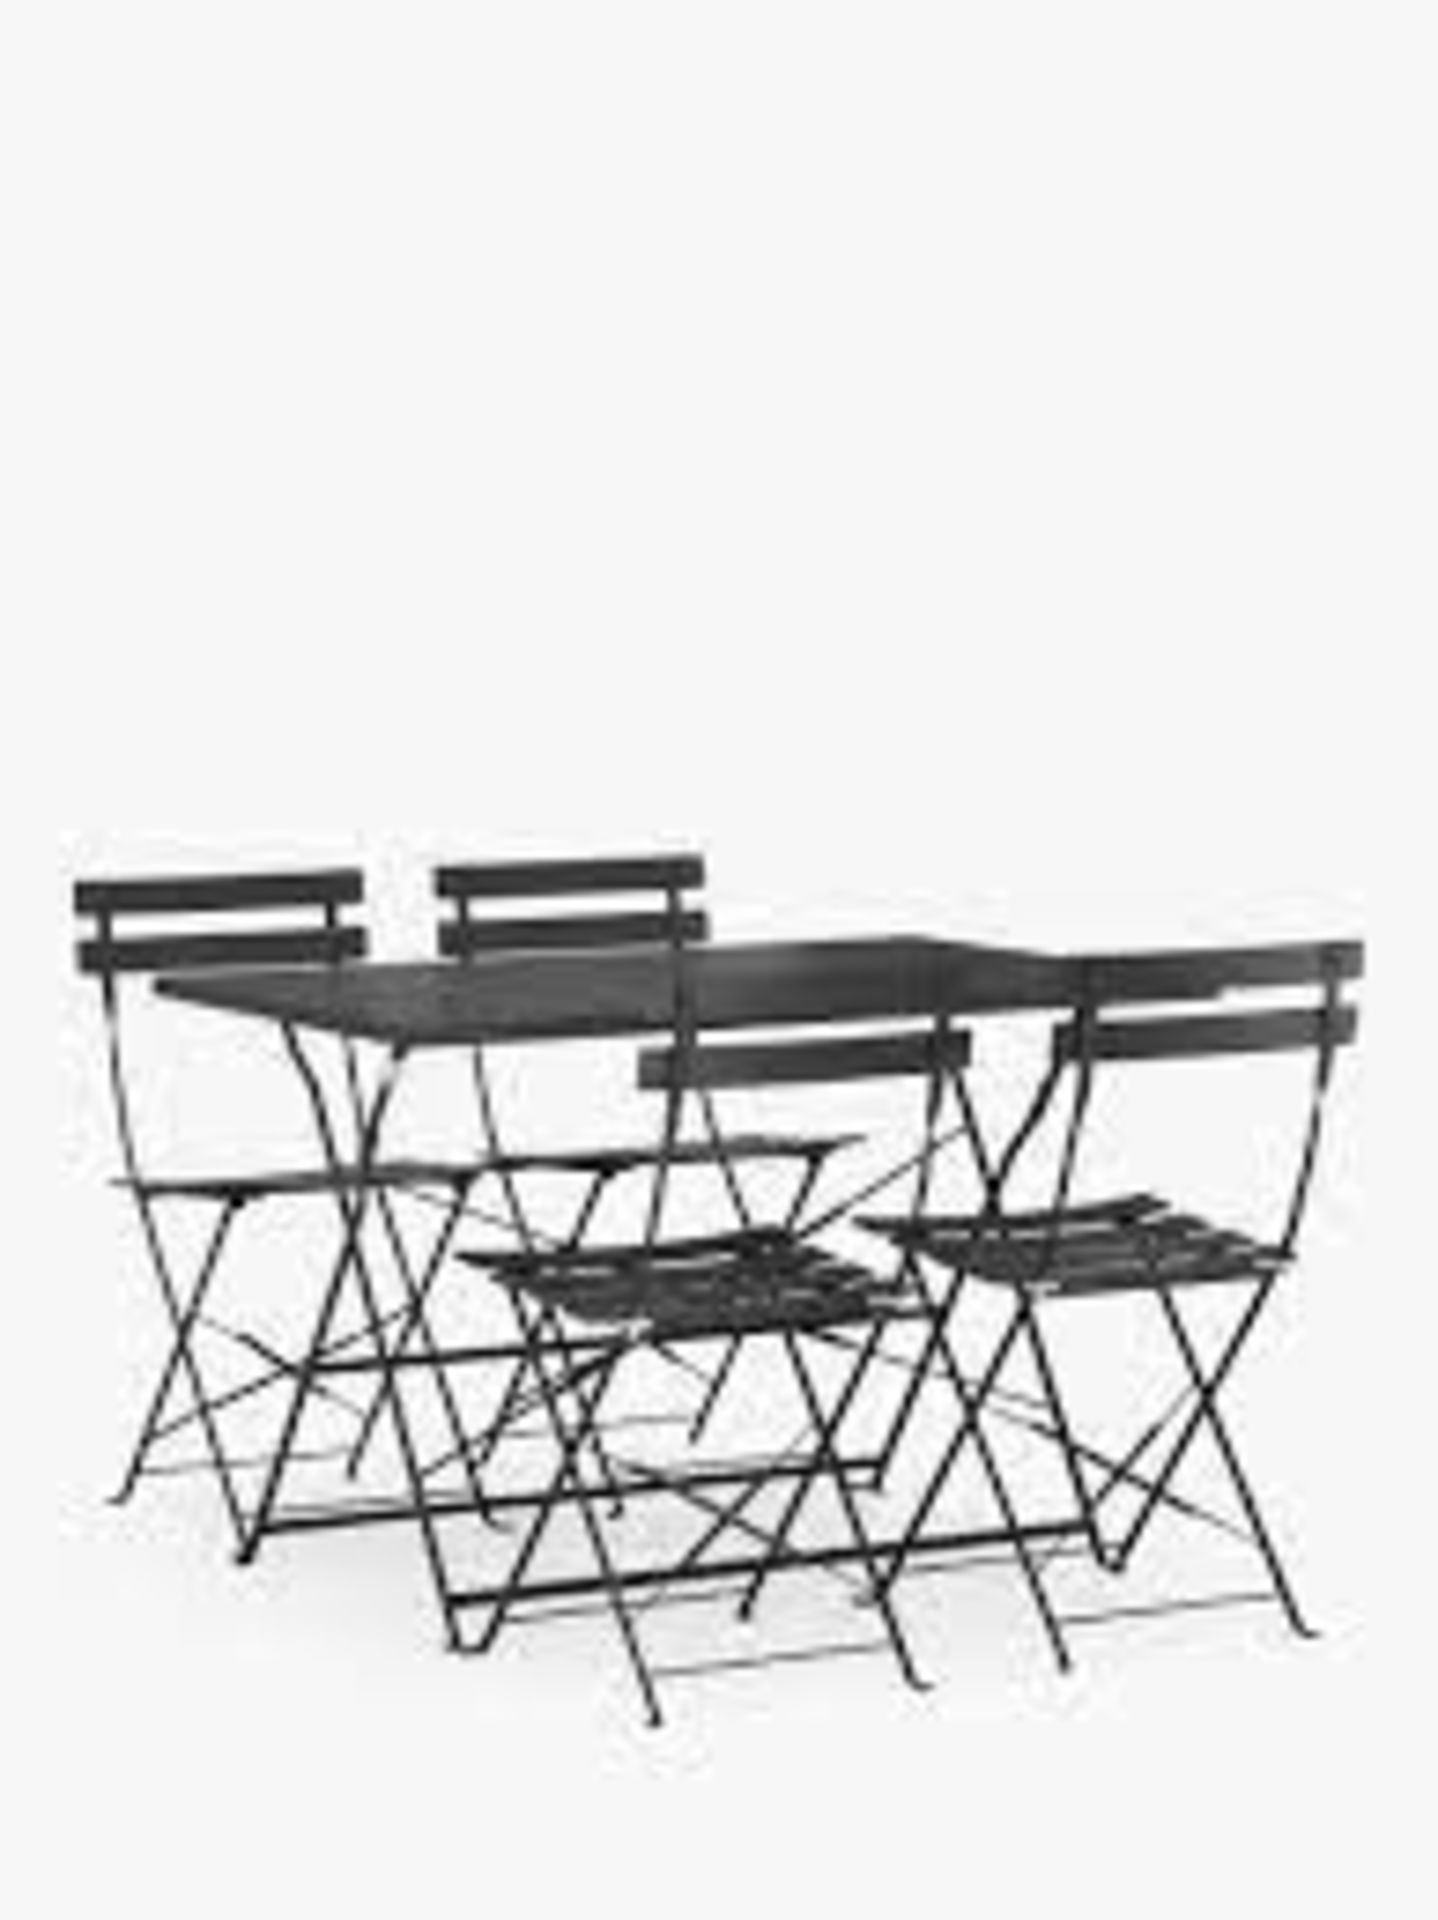 BRAND NEW JOHN LEWIS Camden 4-Seater Garden Table & Chairs Set, Grey. RRP £298.50. Create a - Image 3 of 4